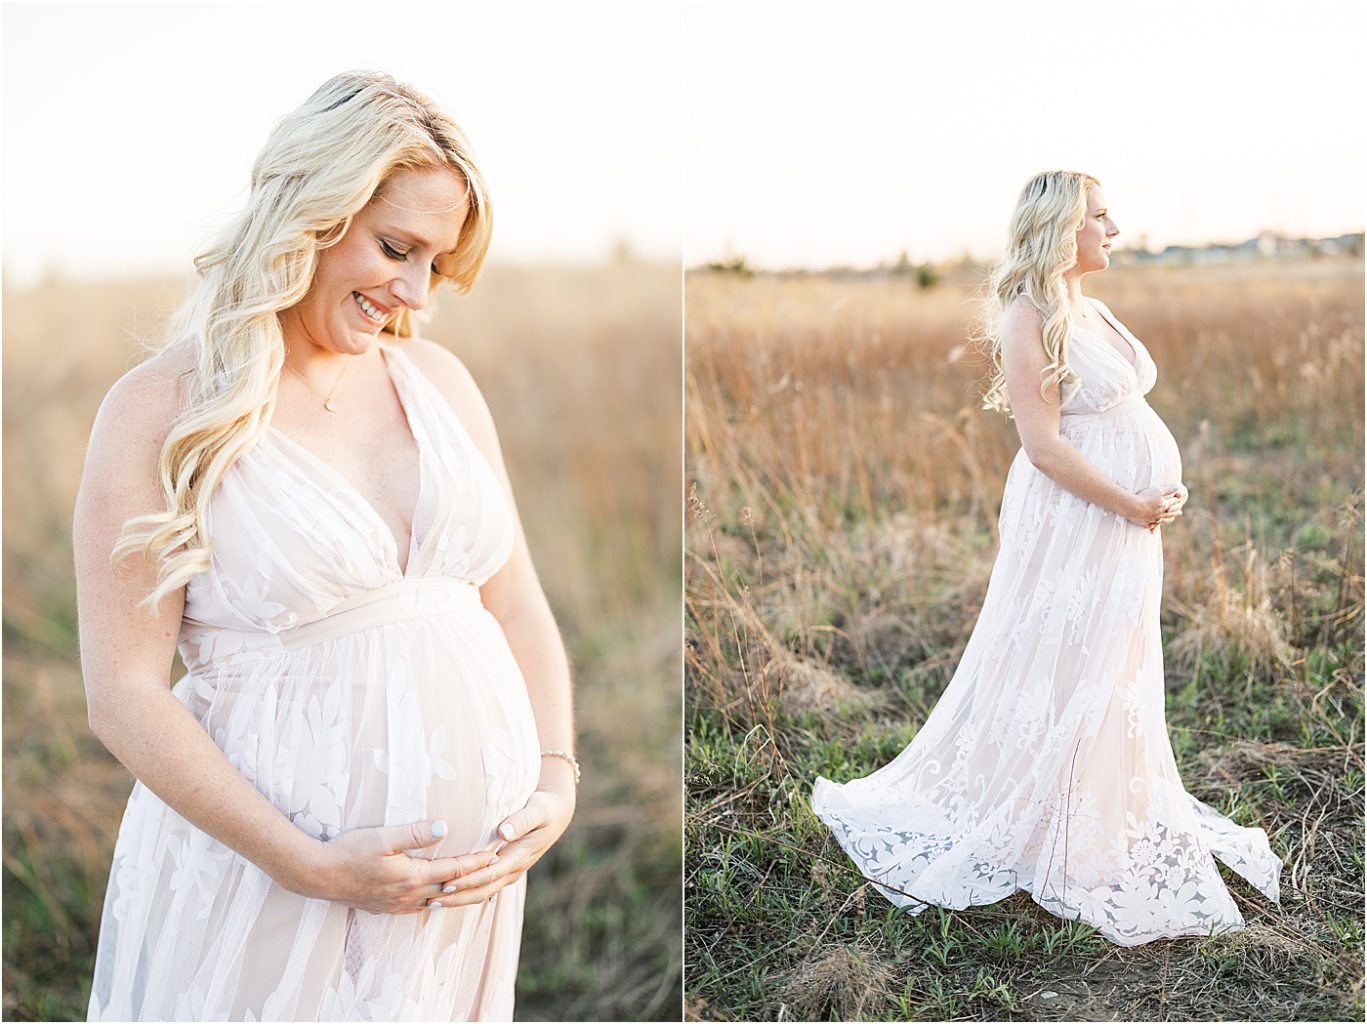 Pregnant mom in field at sunset in Fishers for maternity photos with Lindsay Konopa Photography.